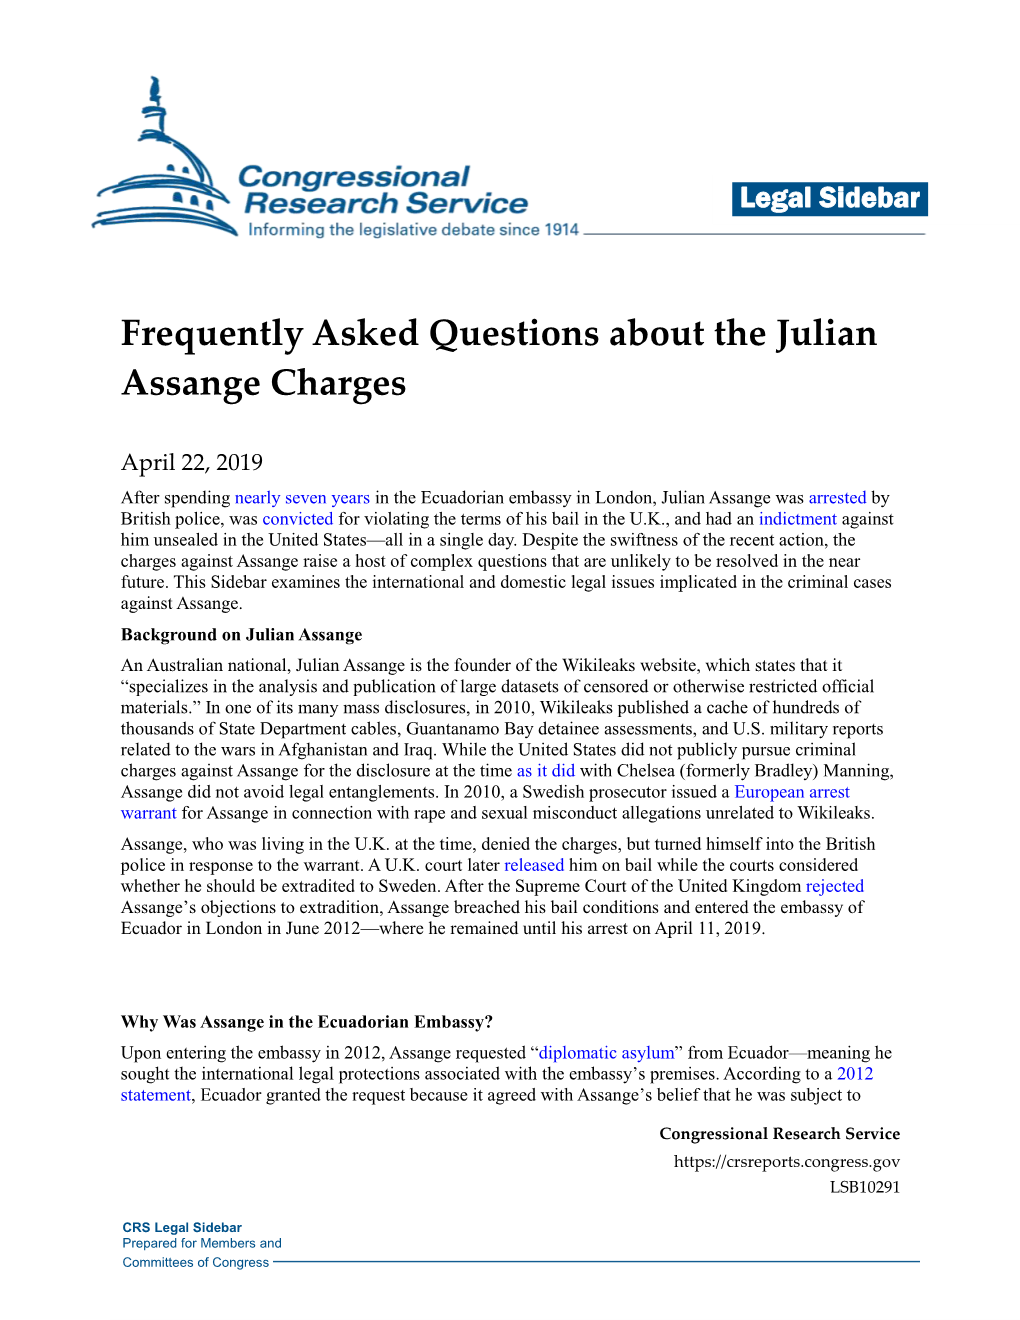 Frequently Asked Questions About the Julian Assange Charges